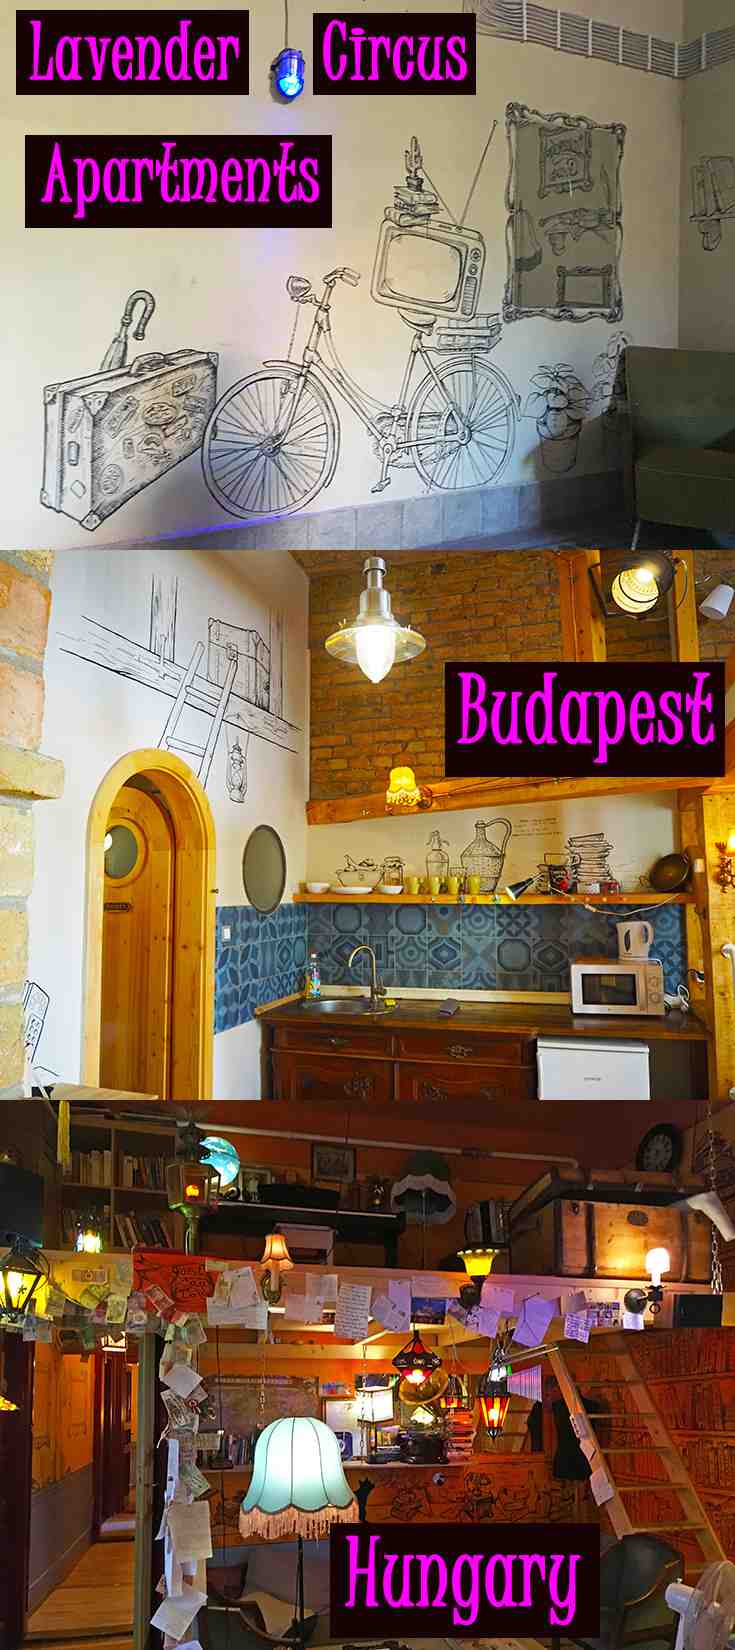 Lavender Circus Apartment, Budapest, Hungary – WhodoIdo: A unique hand drawn designed apartment located in the heart of Budapest. A bright, spacious, split level apartment with a fully equipped kitchen, lounge area and bathroom. A 20 min walk to Szechenyi Baths and Heroes’ Square and close to the State Opera House. Great value for money!